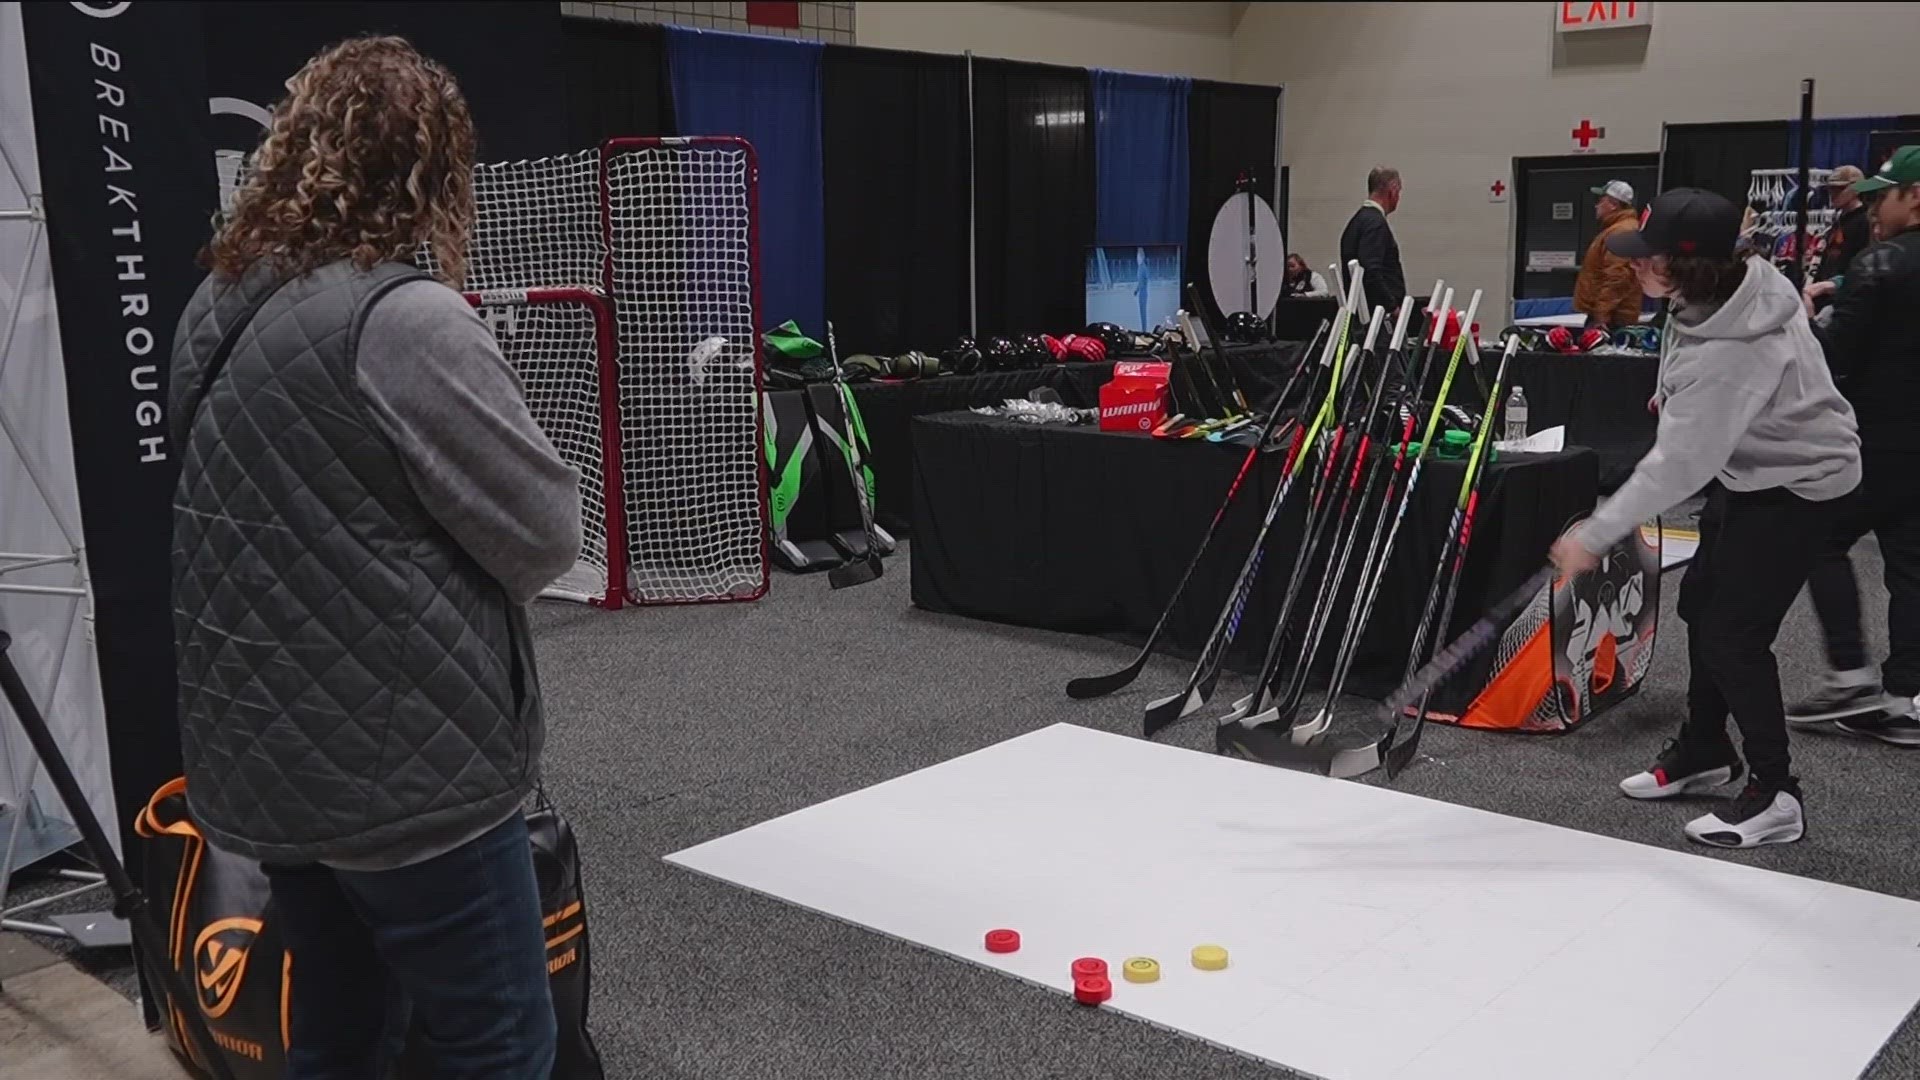 Among other hockey experiences, the expo features an interactive game that tests the hockey skills of kids and adults.